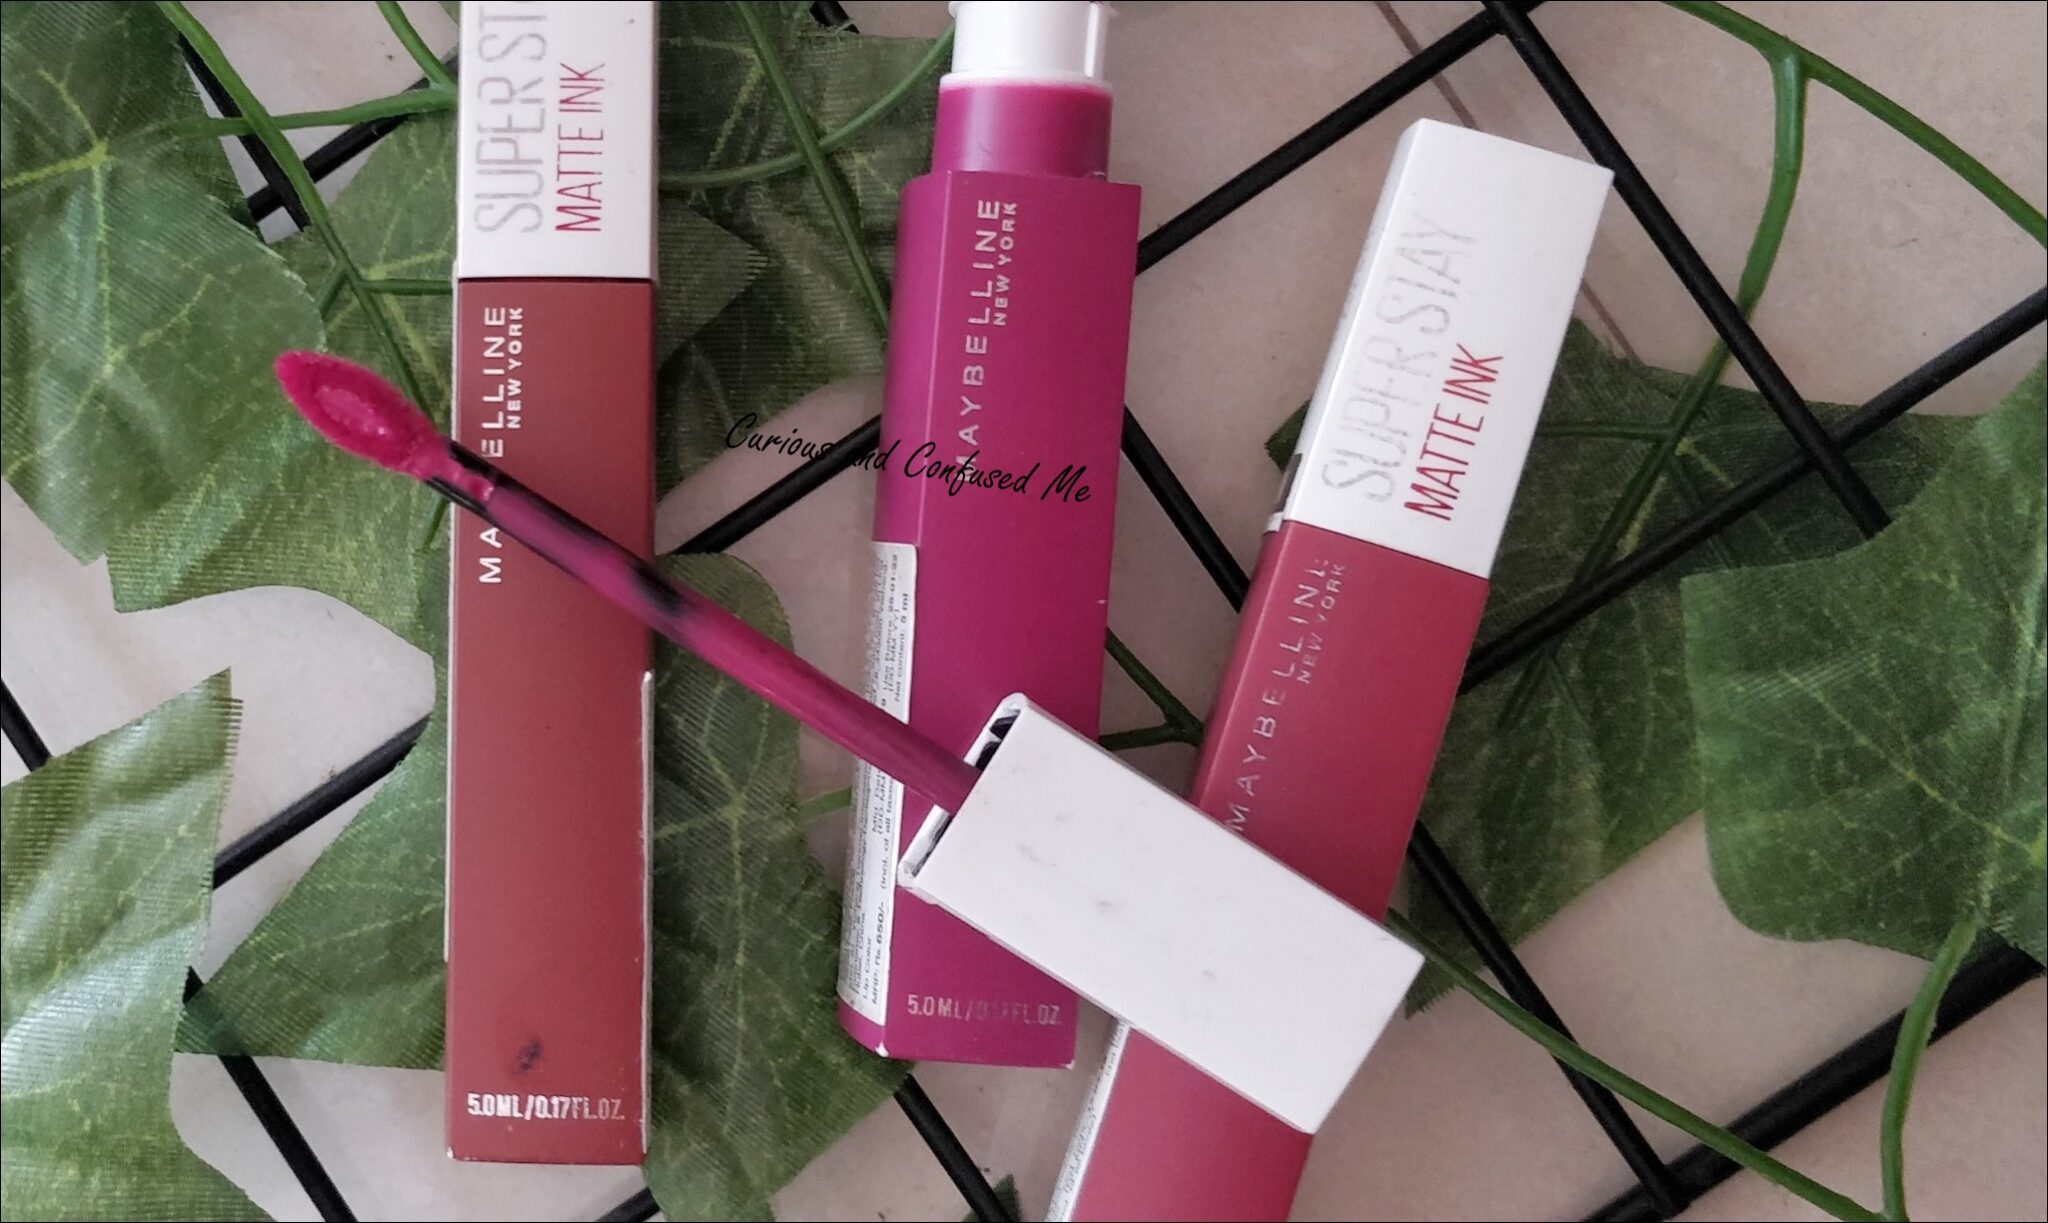 Maybelline New Liquid Review Confused Superstay Matte and – York Ink lipstick Curious me